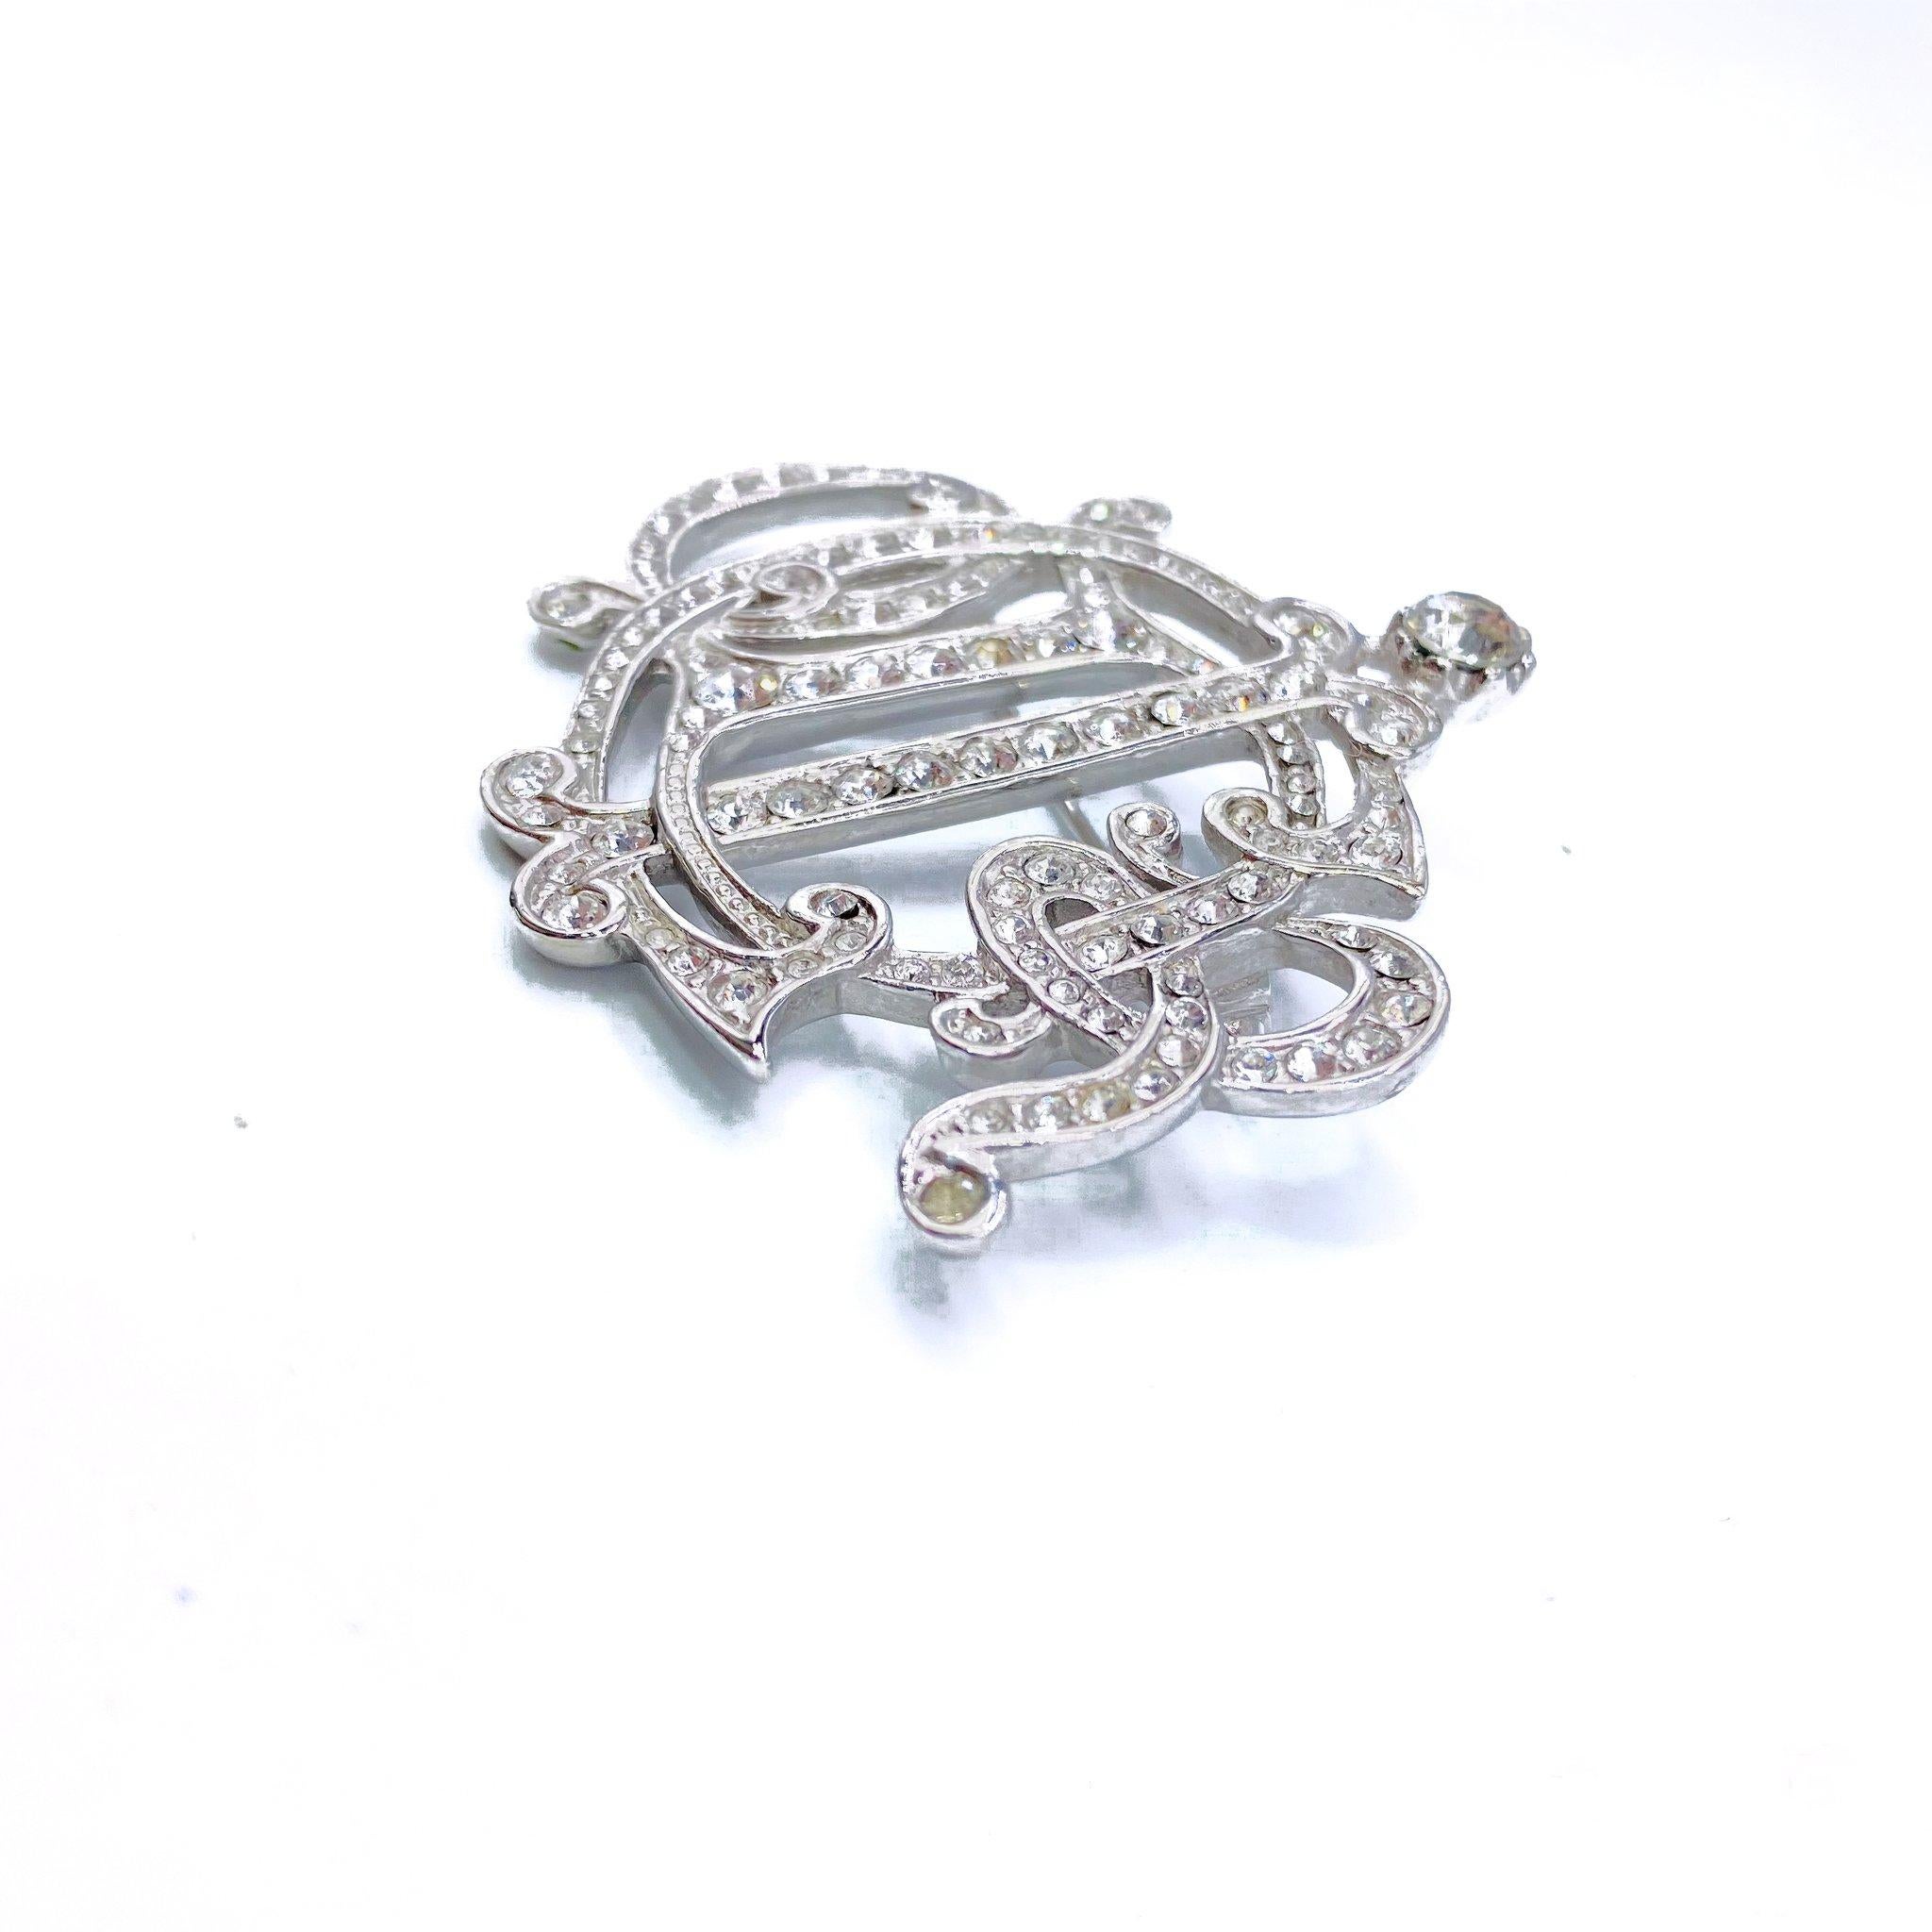 Dior 1980s Vintage Brooch
An iconic knock-out piece from one of the world's most in demand fashion houses
Add to your favourite jackets, blazers and coats for instant Dior glamour

Detail
-Made in Germany in the 1980s
-Crafted from rhodium plated